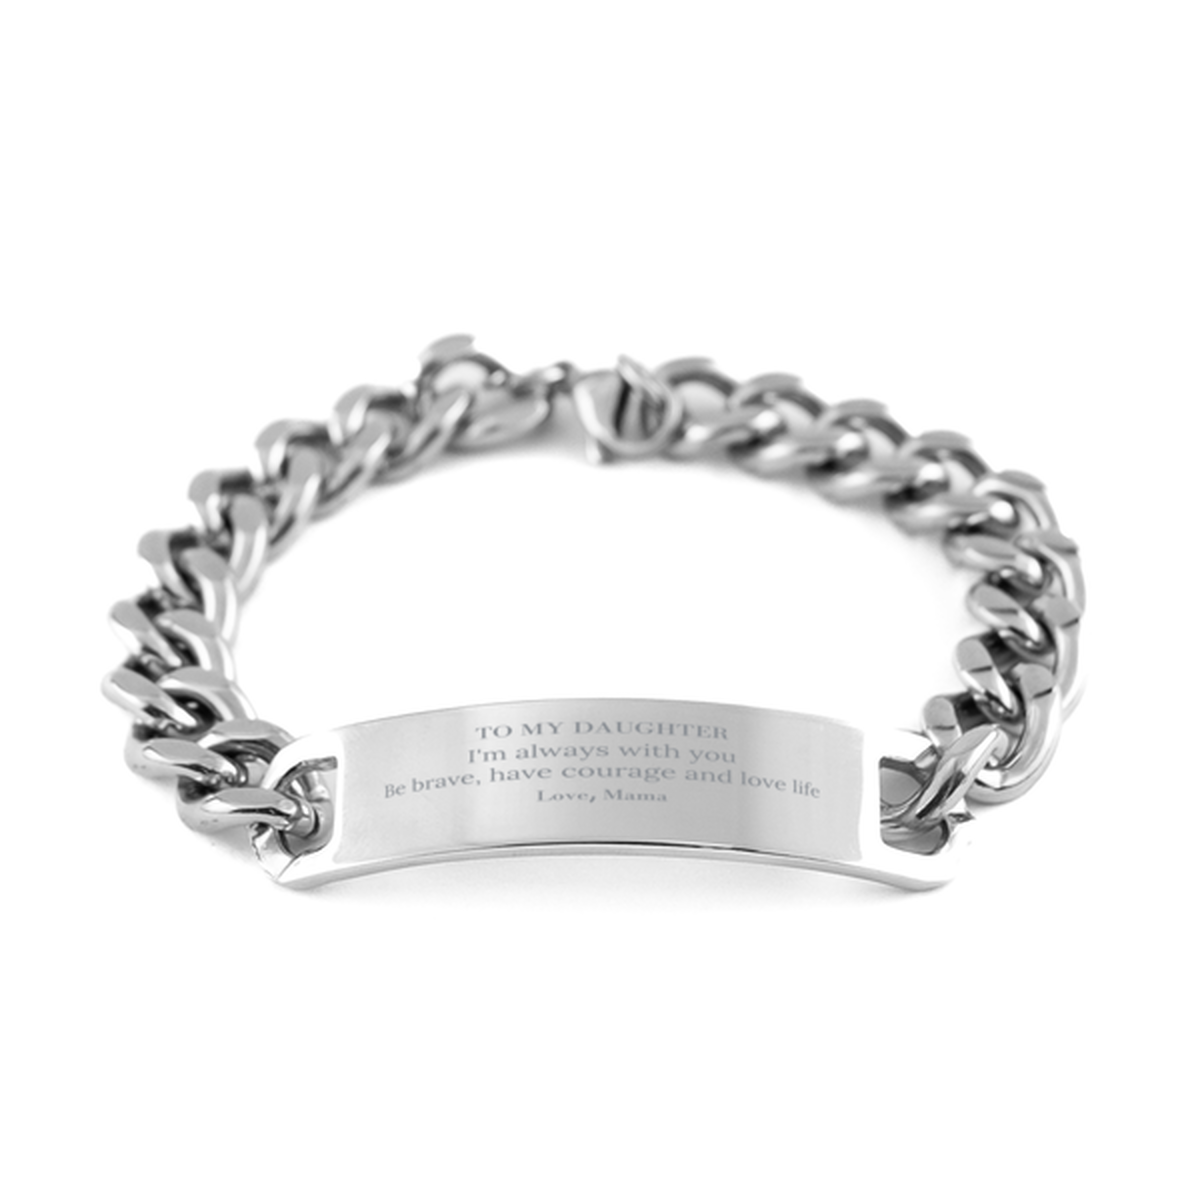 To My Daughter Gifts from Mama, Unique Cuban Chain Stainless Steel Bracelet Inspirational Christmas Birthday Graduation Gifts for Daughter I'm always with you. Be brave, have courage and love life. Love, Mama